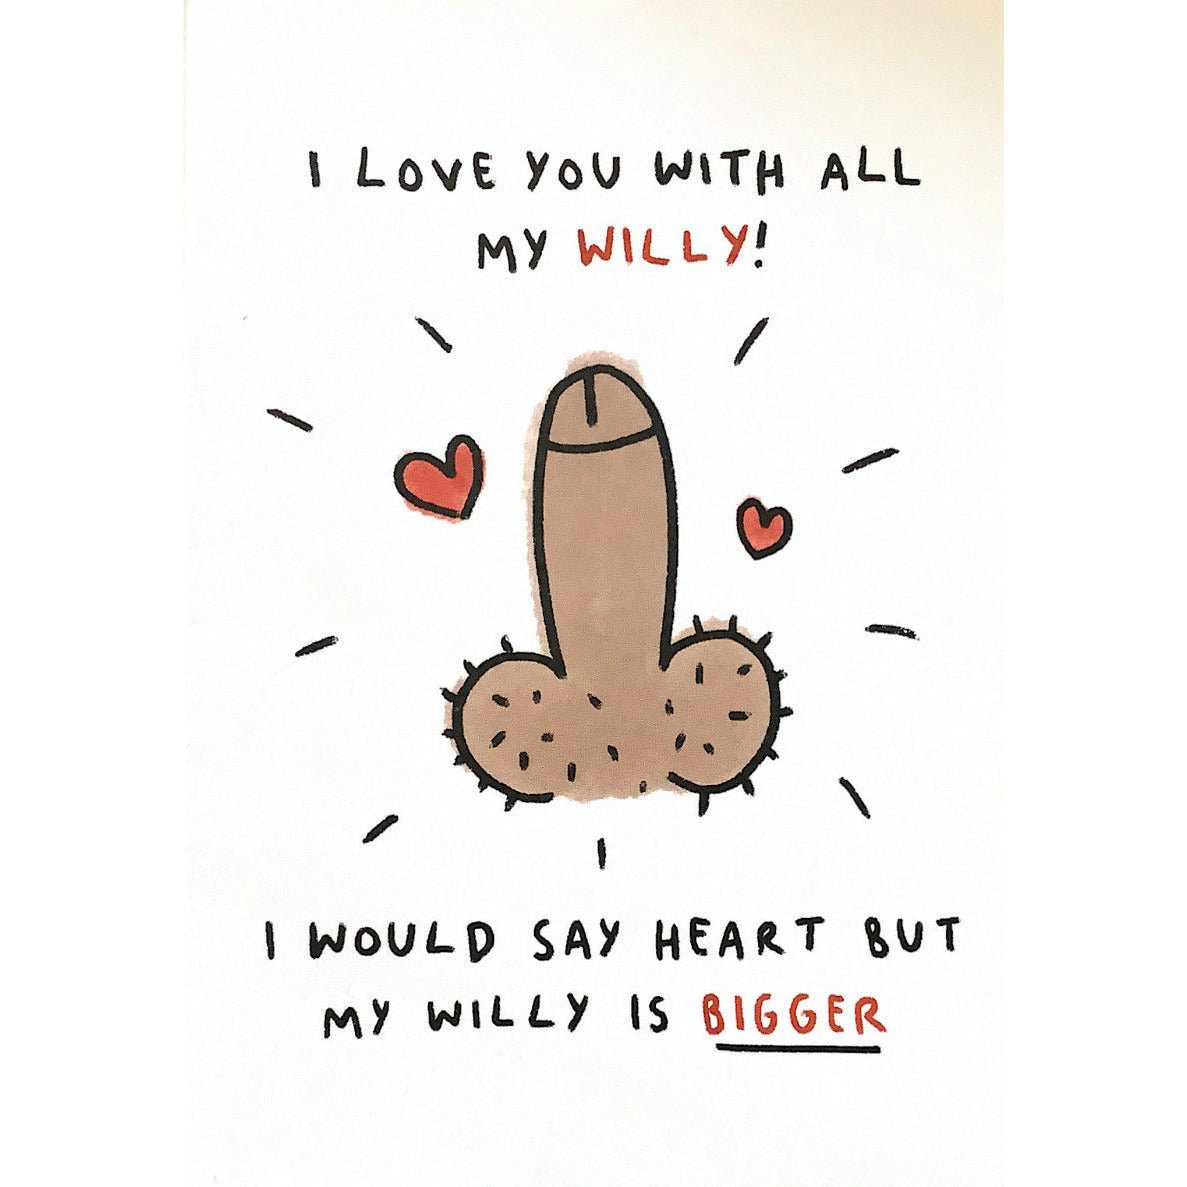 With All My Willy - Greeting Card - Love